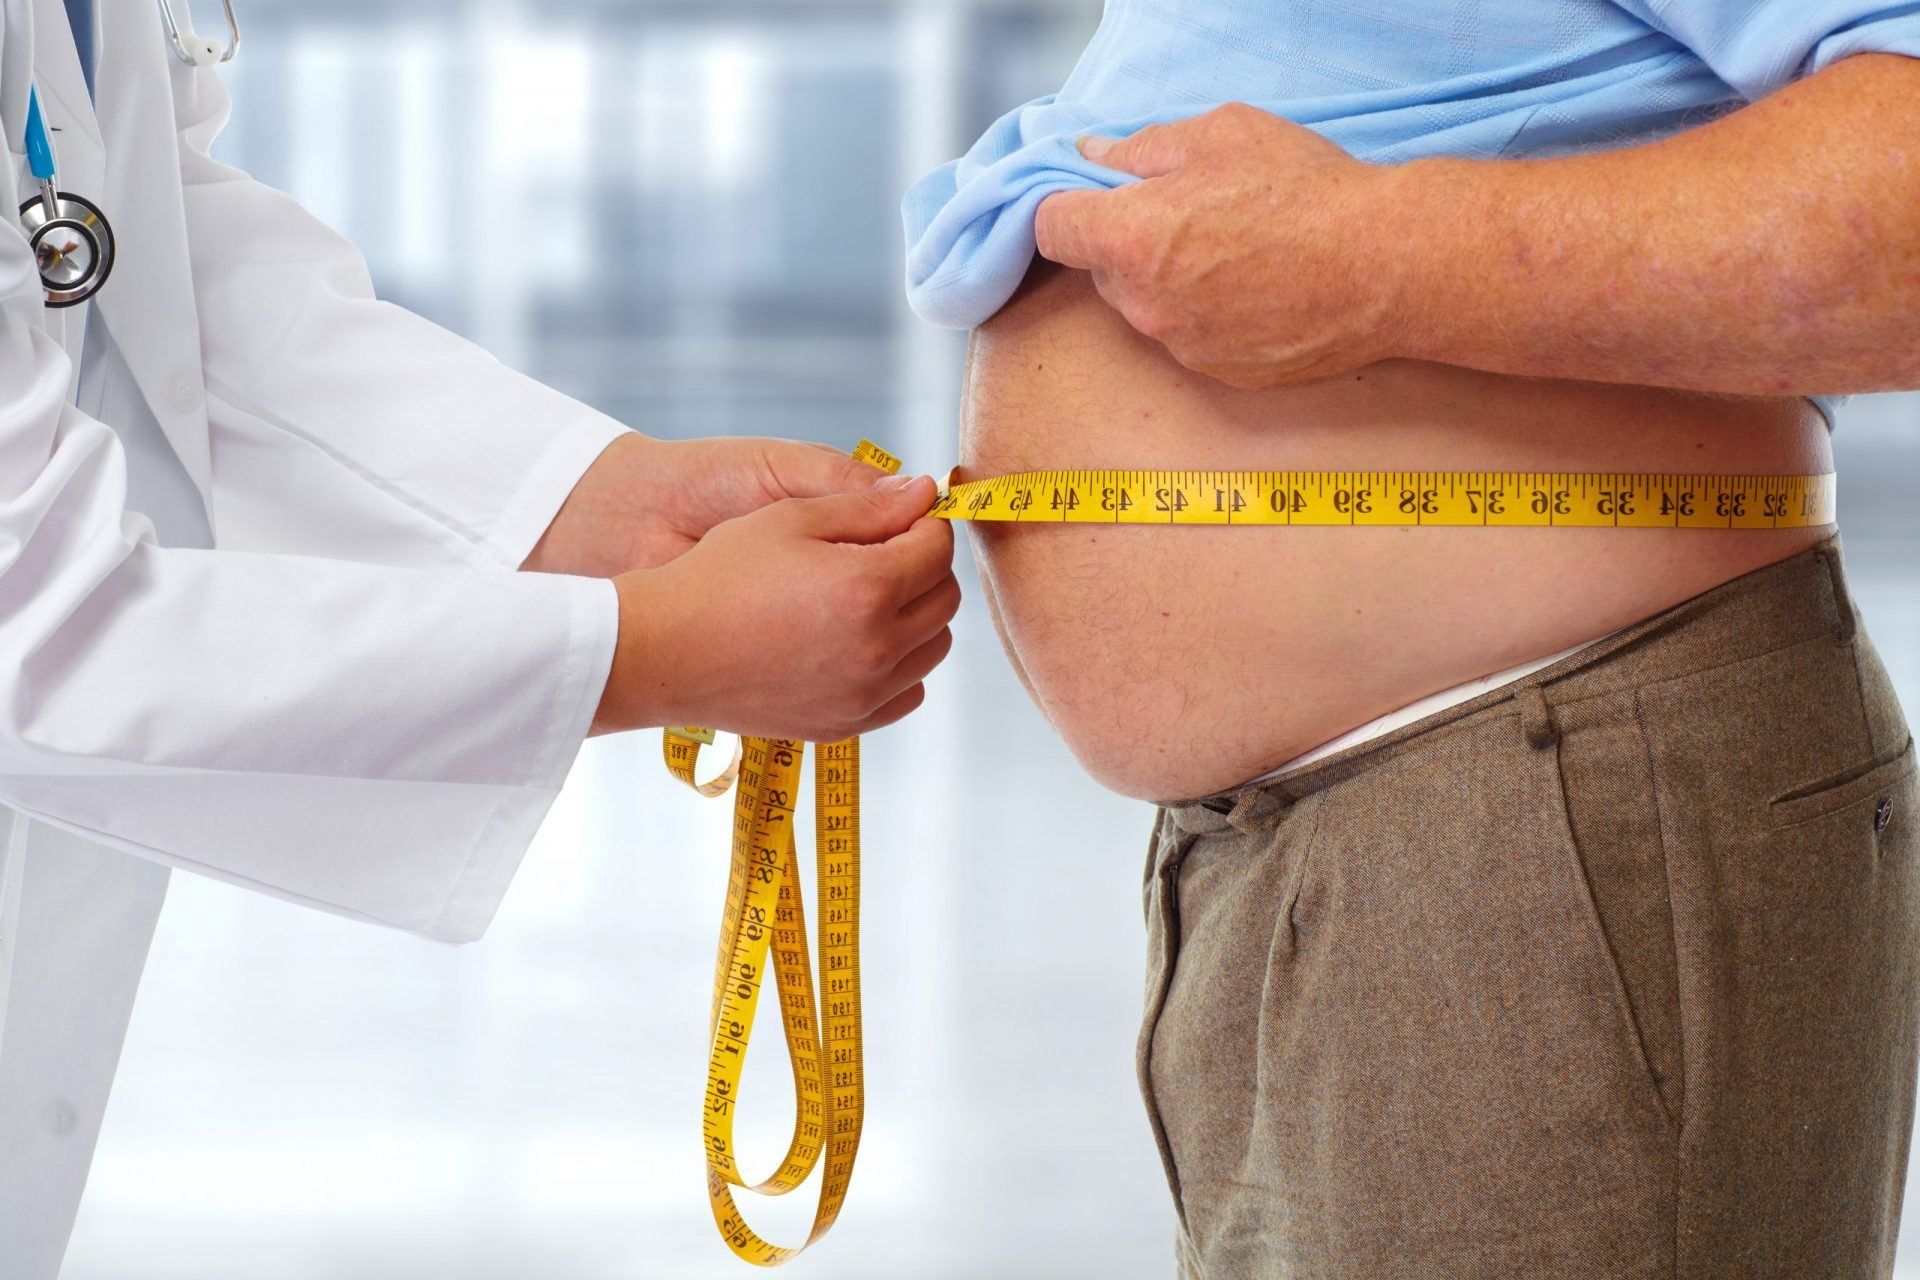 Substantial Weight Loss Can Reduce Risk of Severe COVID-19 Complications